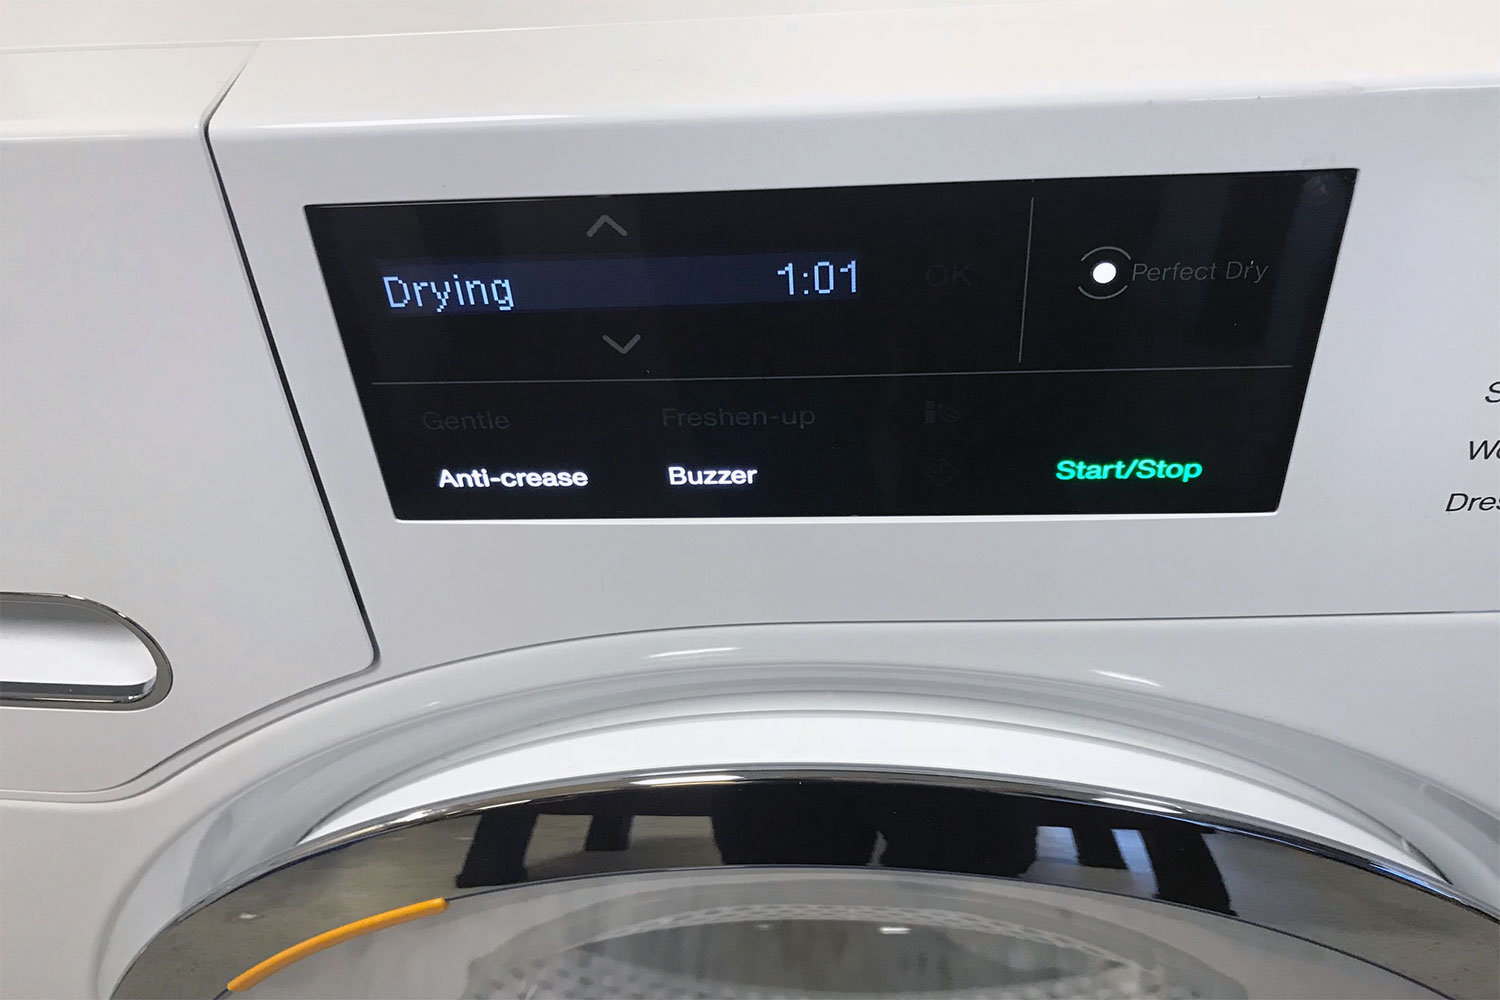 Product Review: Miele TXR860WP Eco & Steam - Reviewed